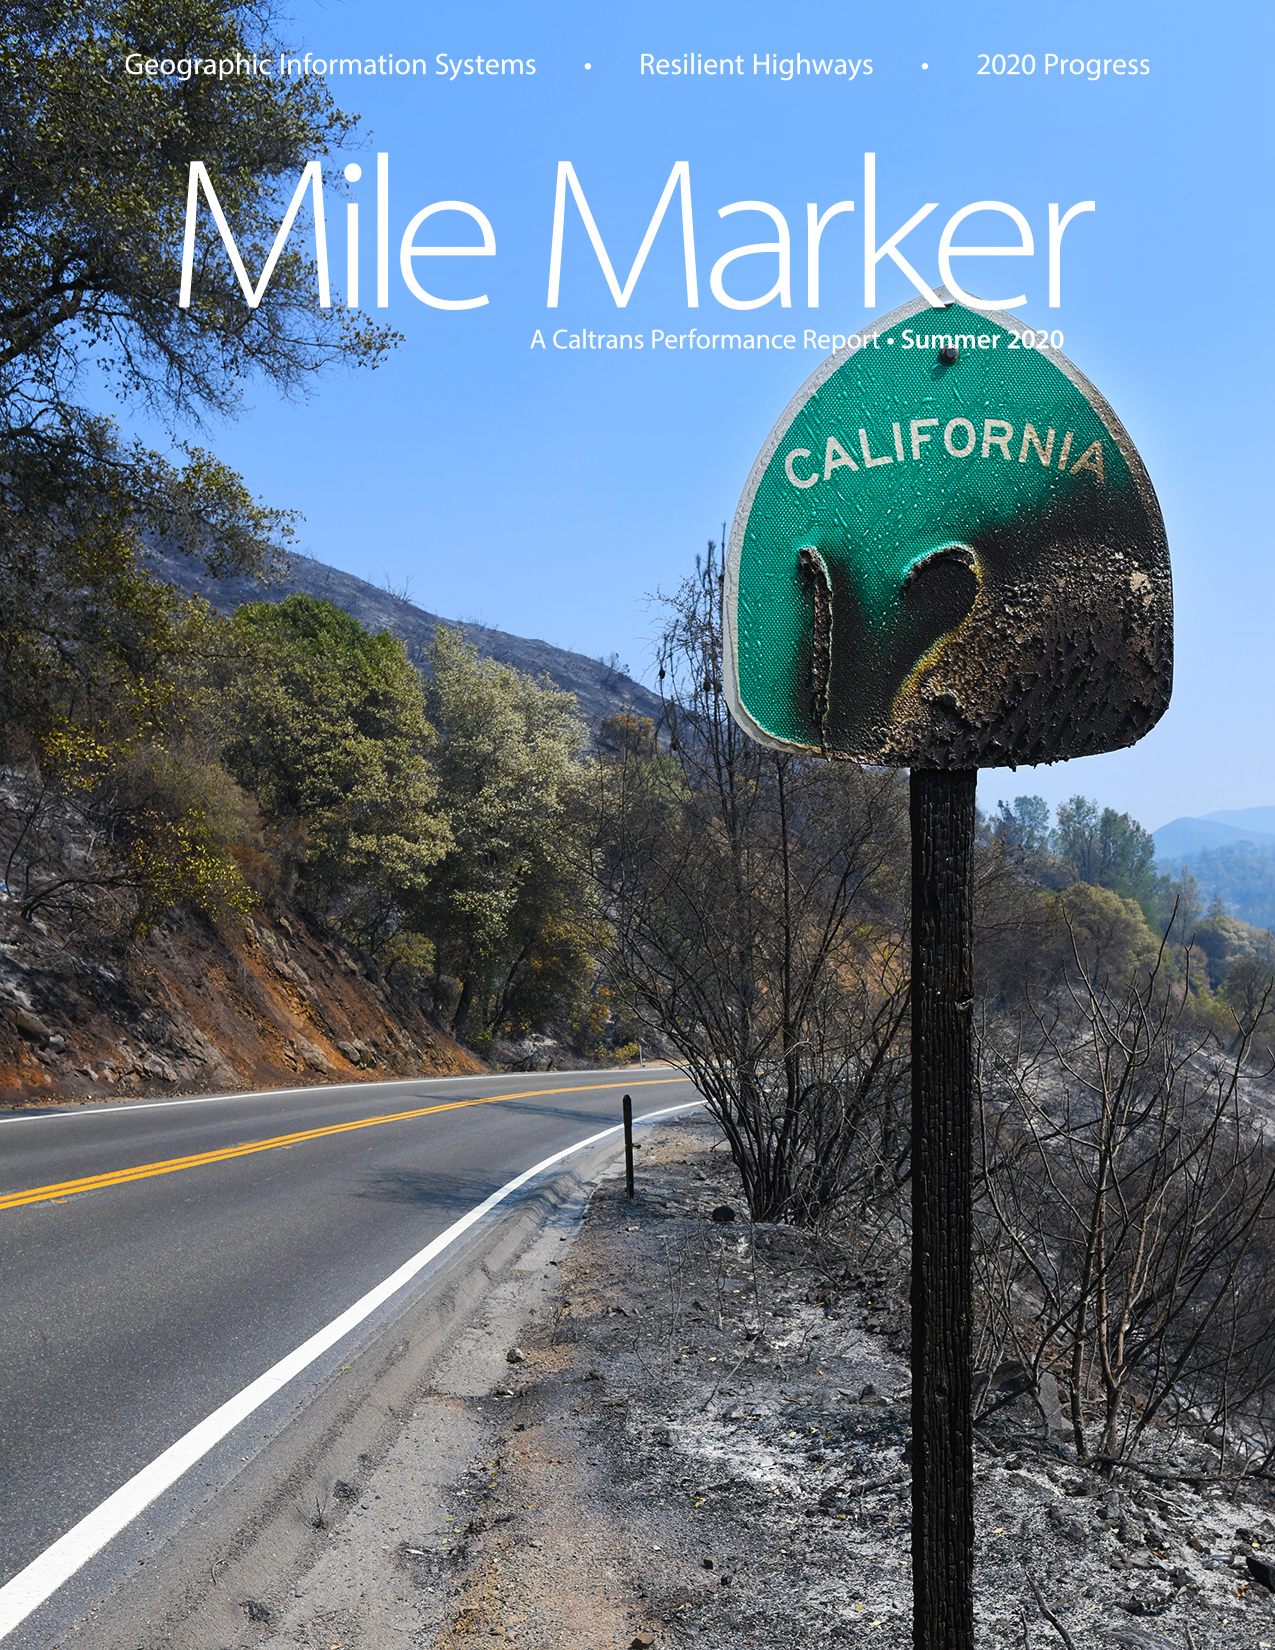 Cover image of the Summer 2020 Mile Marker showing Highway 128 and fire damage done to the roadway bushes and a highway marker in the foreground.